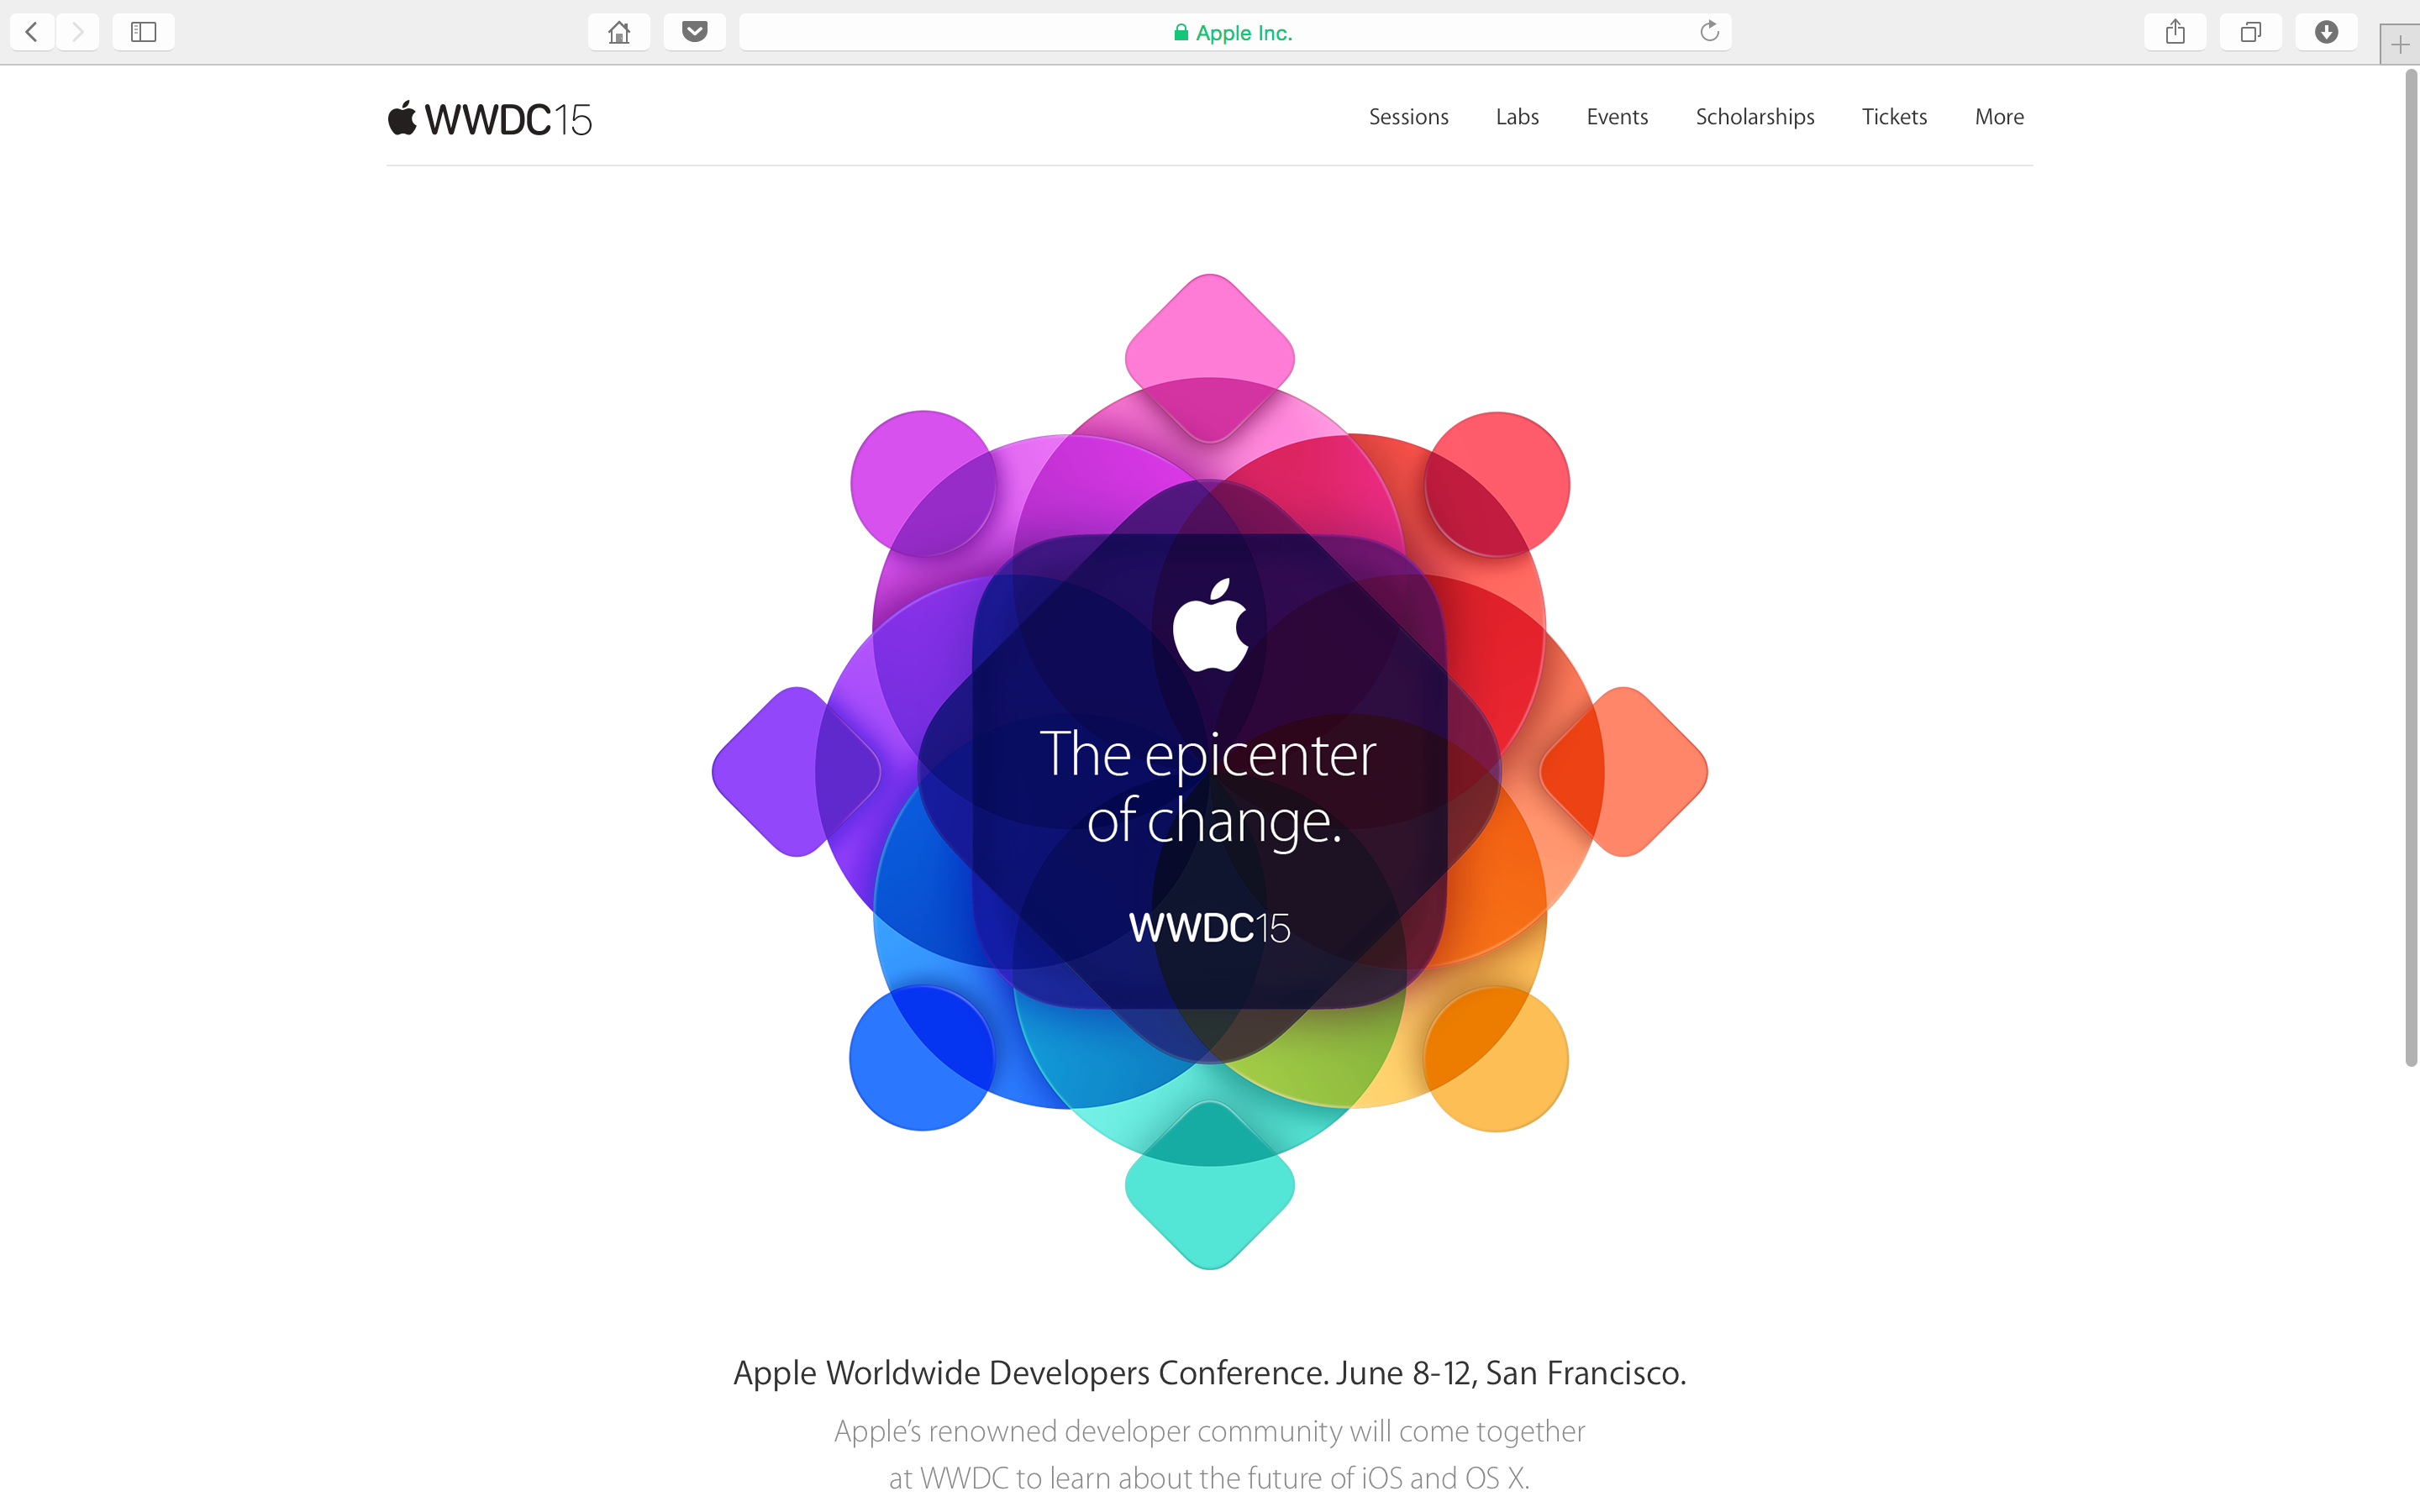 WWDC 2015（WorldWide Developers Conference 2015）